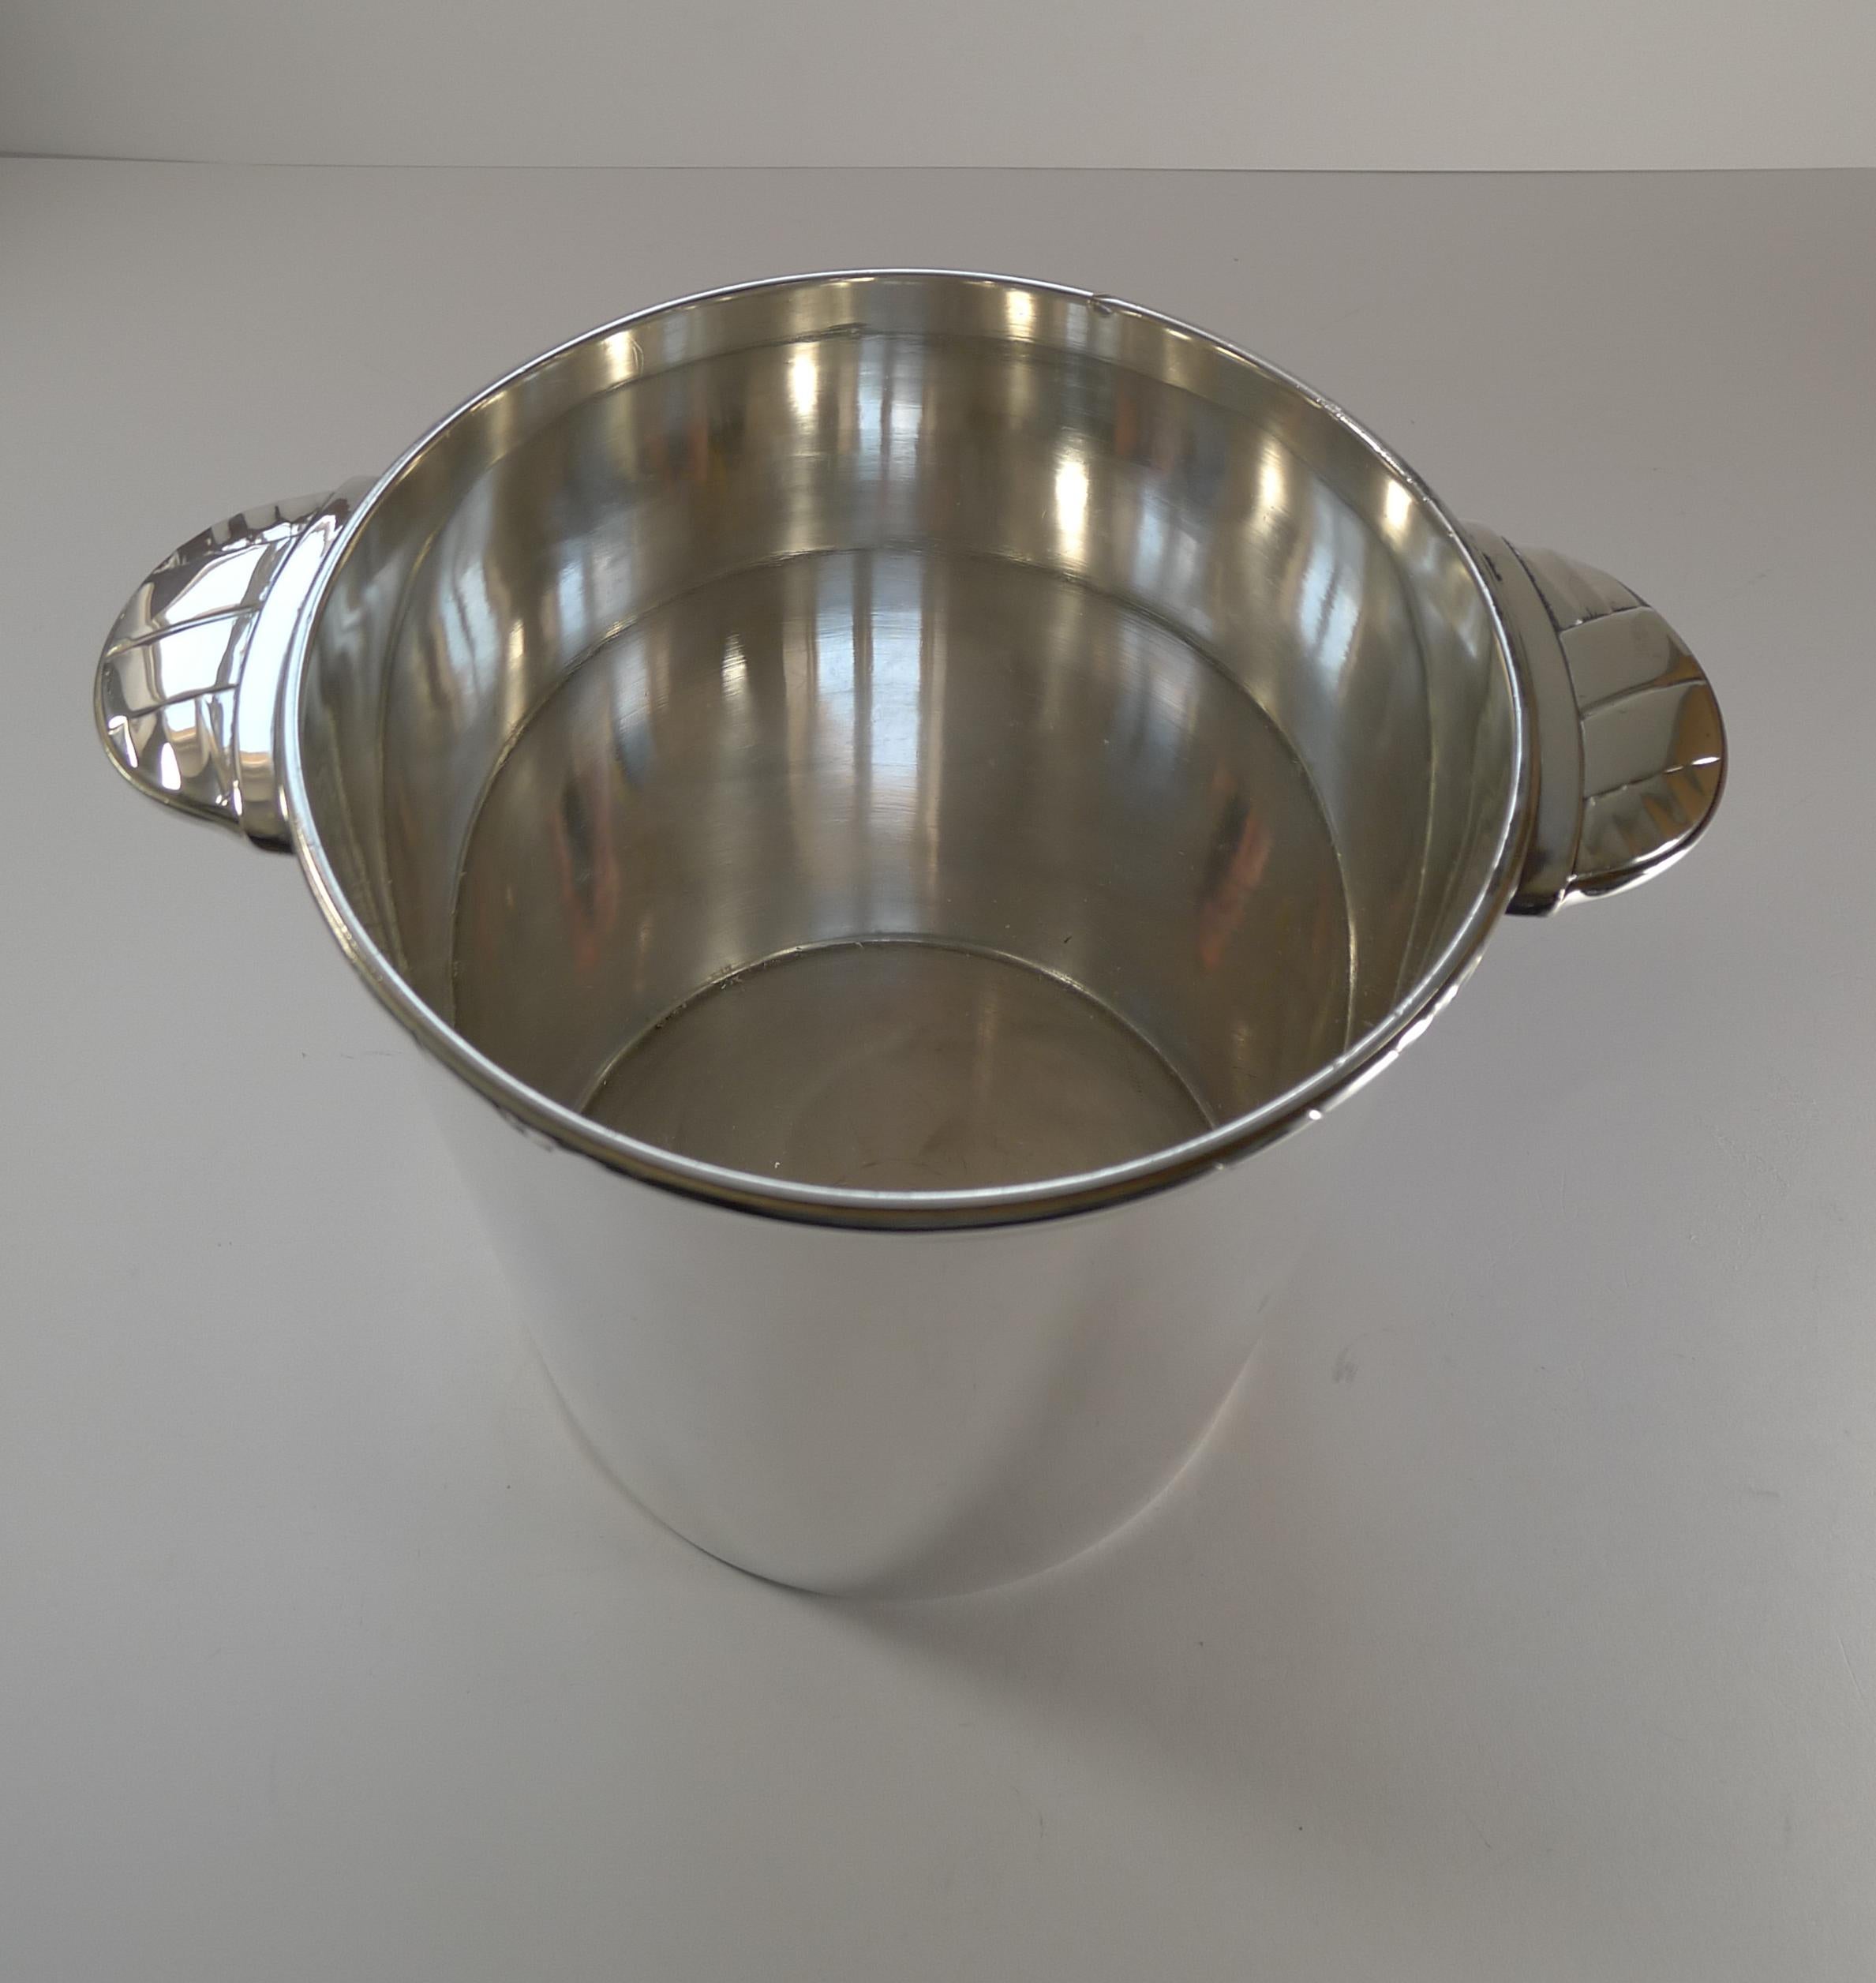 A scarce Art Deco Champagne bucket by the top-notch silversmith, Orfèvrerie Ercuis of Paris.

It has been professionally cleaned and polished in our silversmith's workshop, restoring it to it's former glory.

A most unusual and hard to find